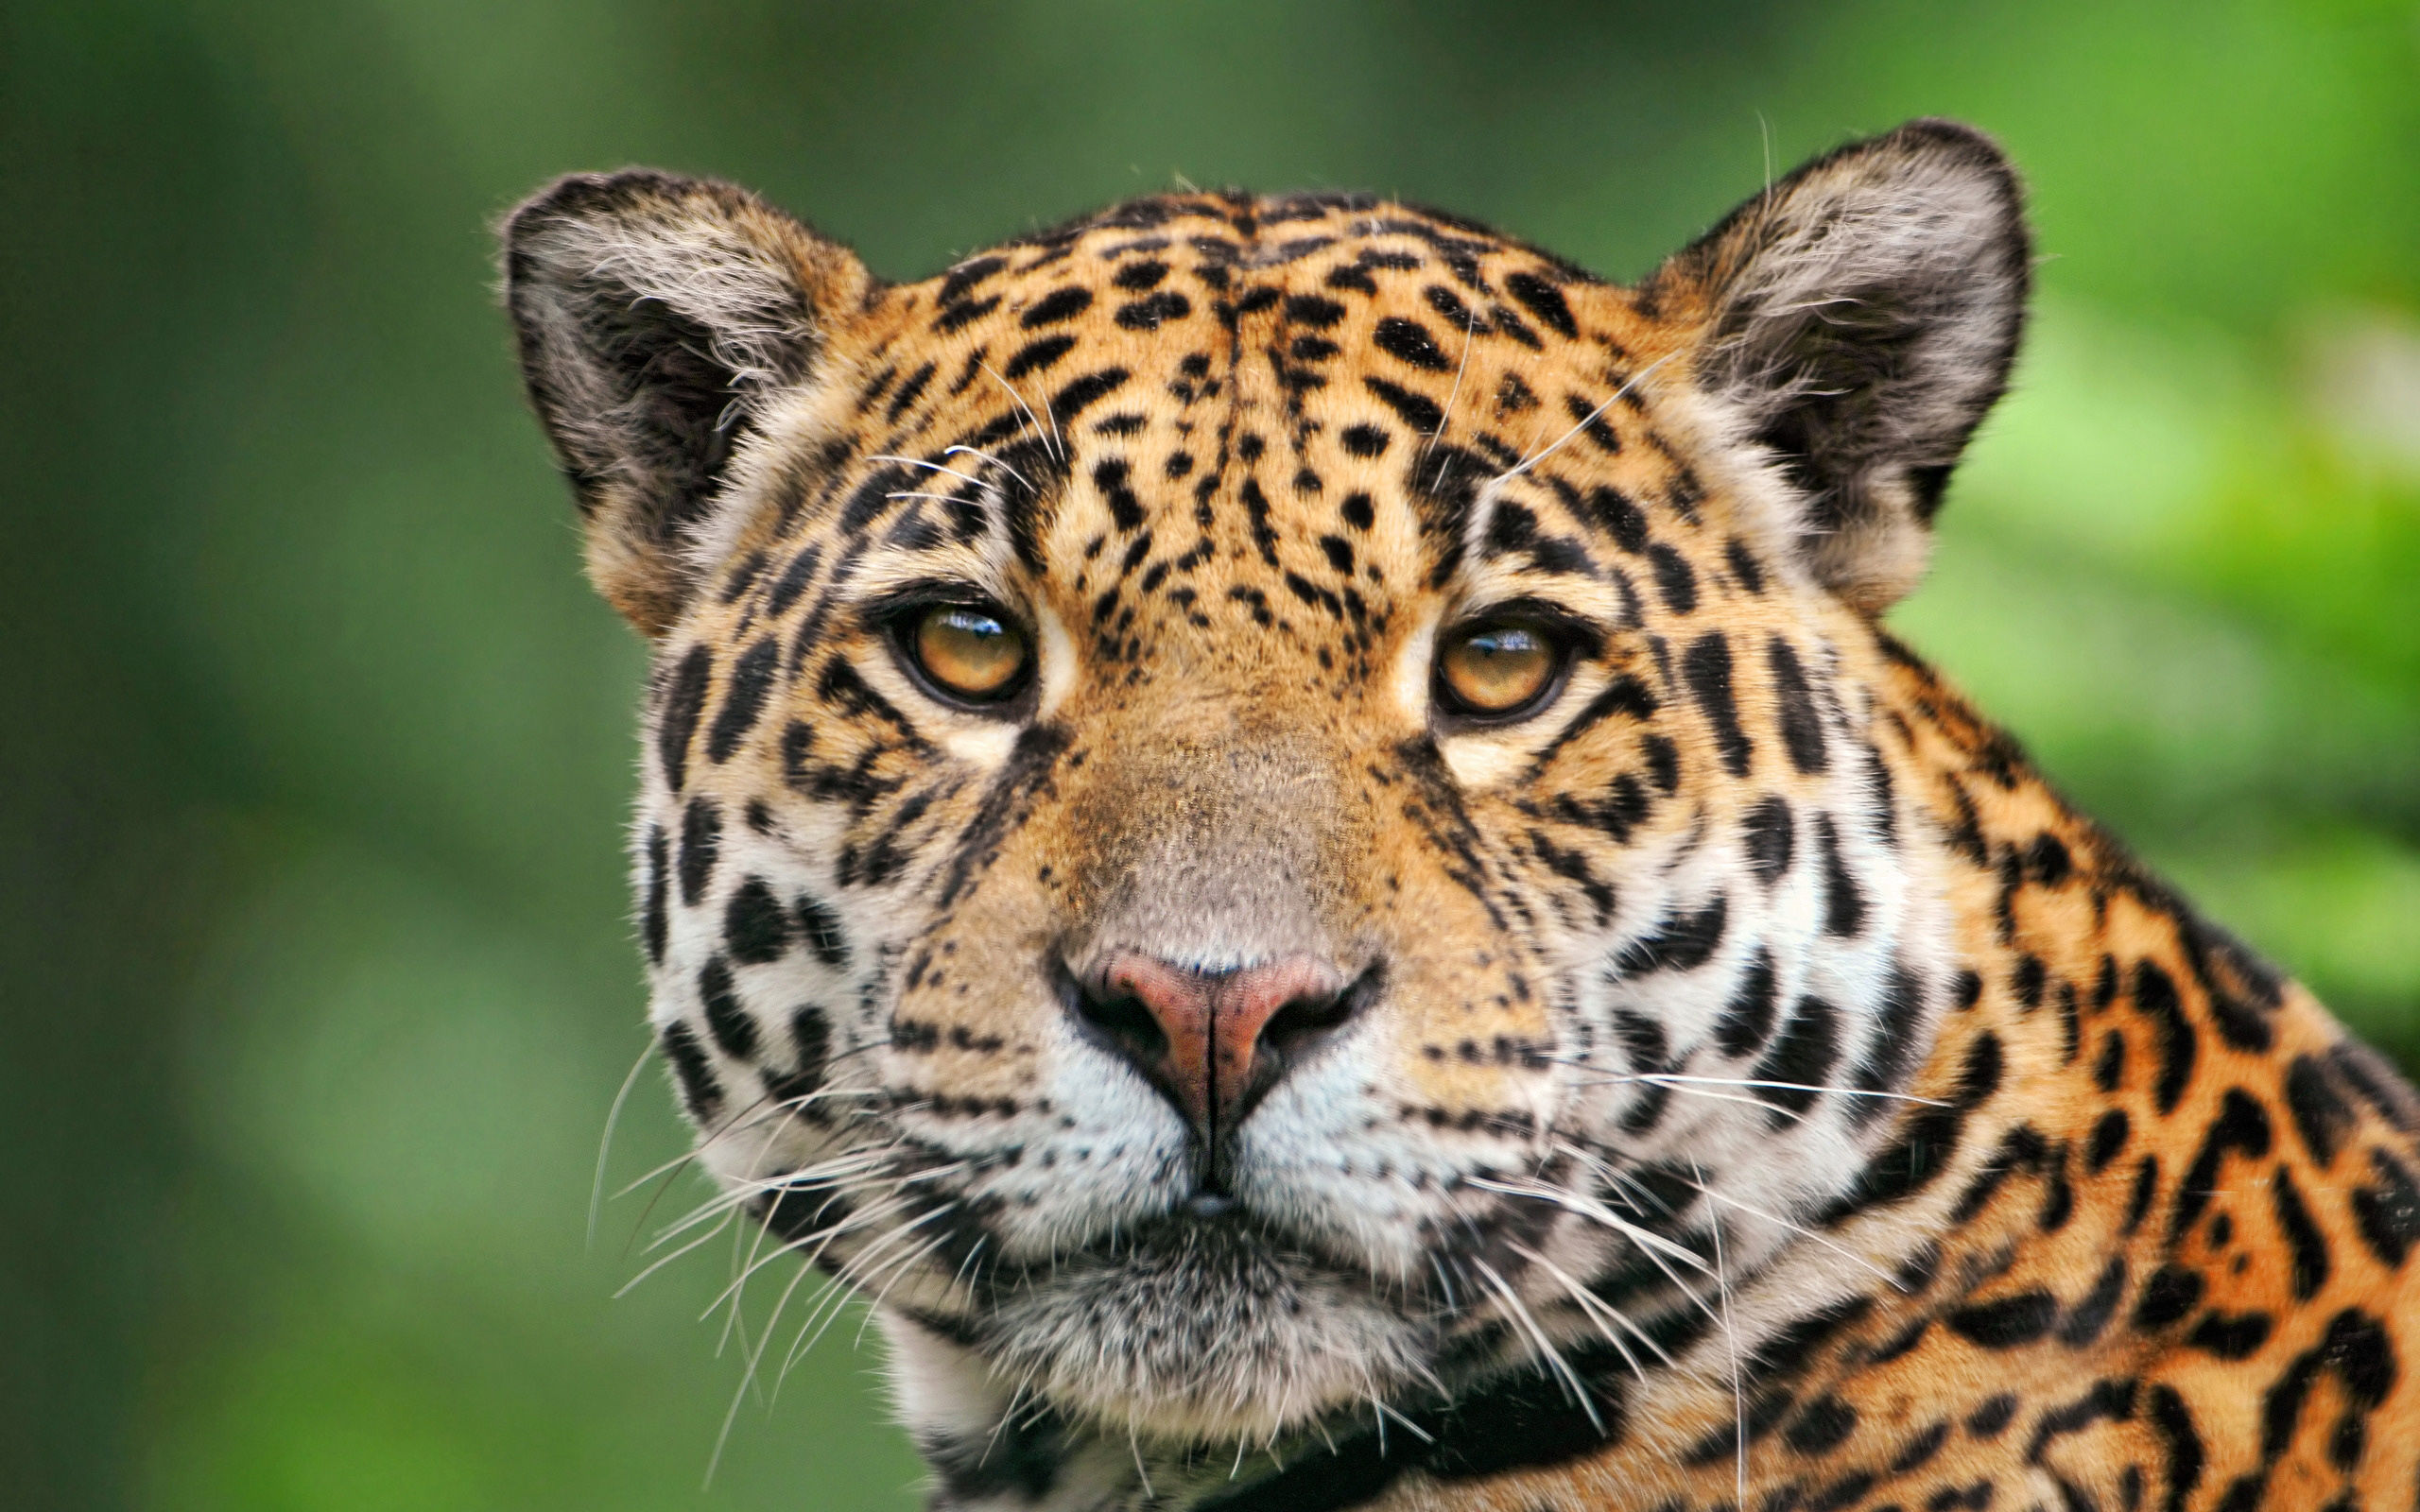 Jaguar Animal Hd Wallpapers - Good Quality Pictures Of Animals - HD Wallpaper 